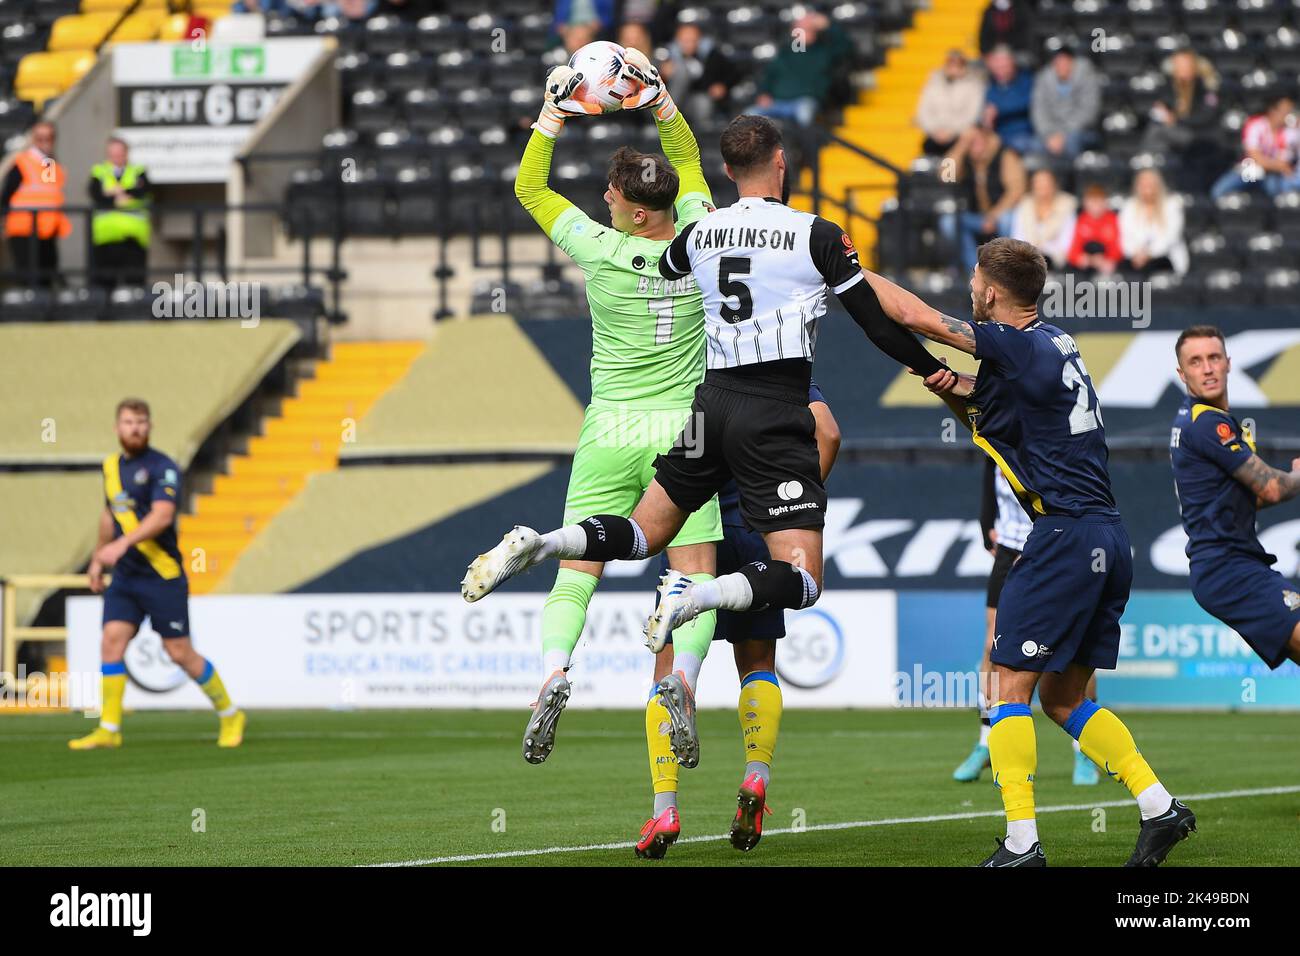 Nottingham, UK. 1st October 2022Oliver Byrne of Altrincham saves the ball under pressure from Connell Rawlinson of Notts County during the Vanarama National League match between Notts County and Altrincham at Meadow Lane, Nottingham on Saturday 1st October 2022. (Credit: Jon Hobley | MI News) Credit: MI News & Sport /Alamy Live News Stock Photo